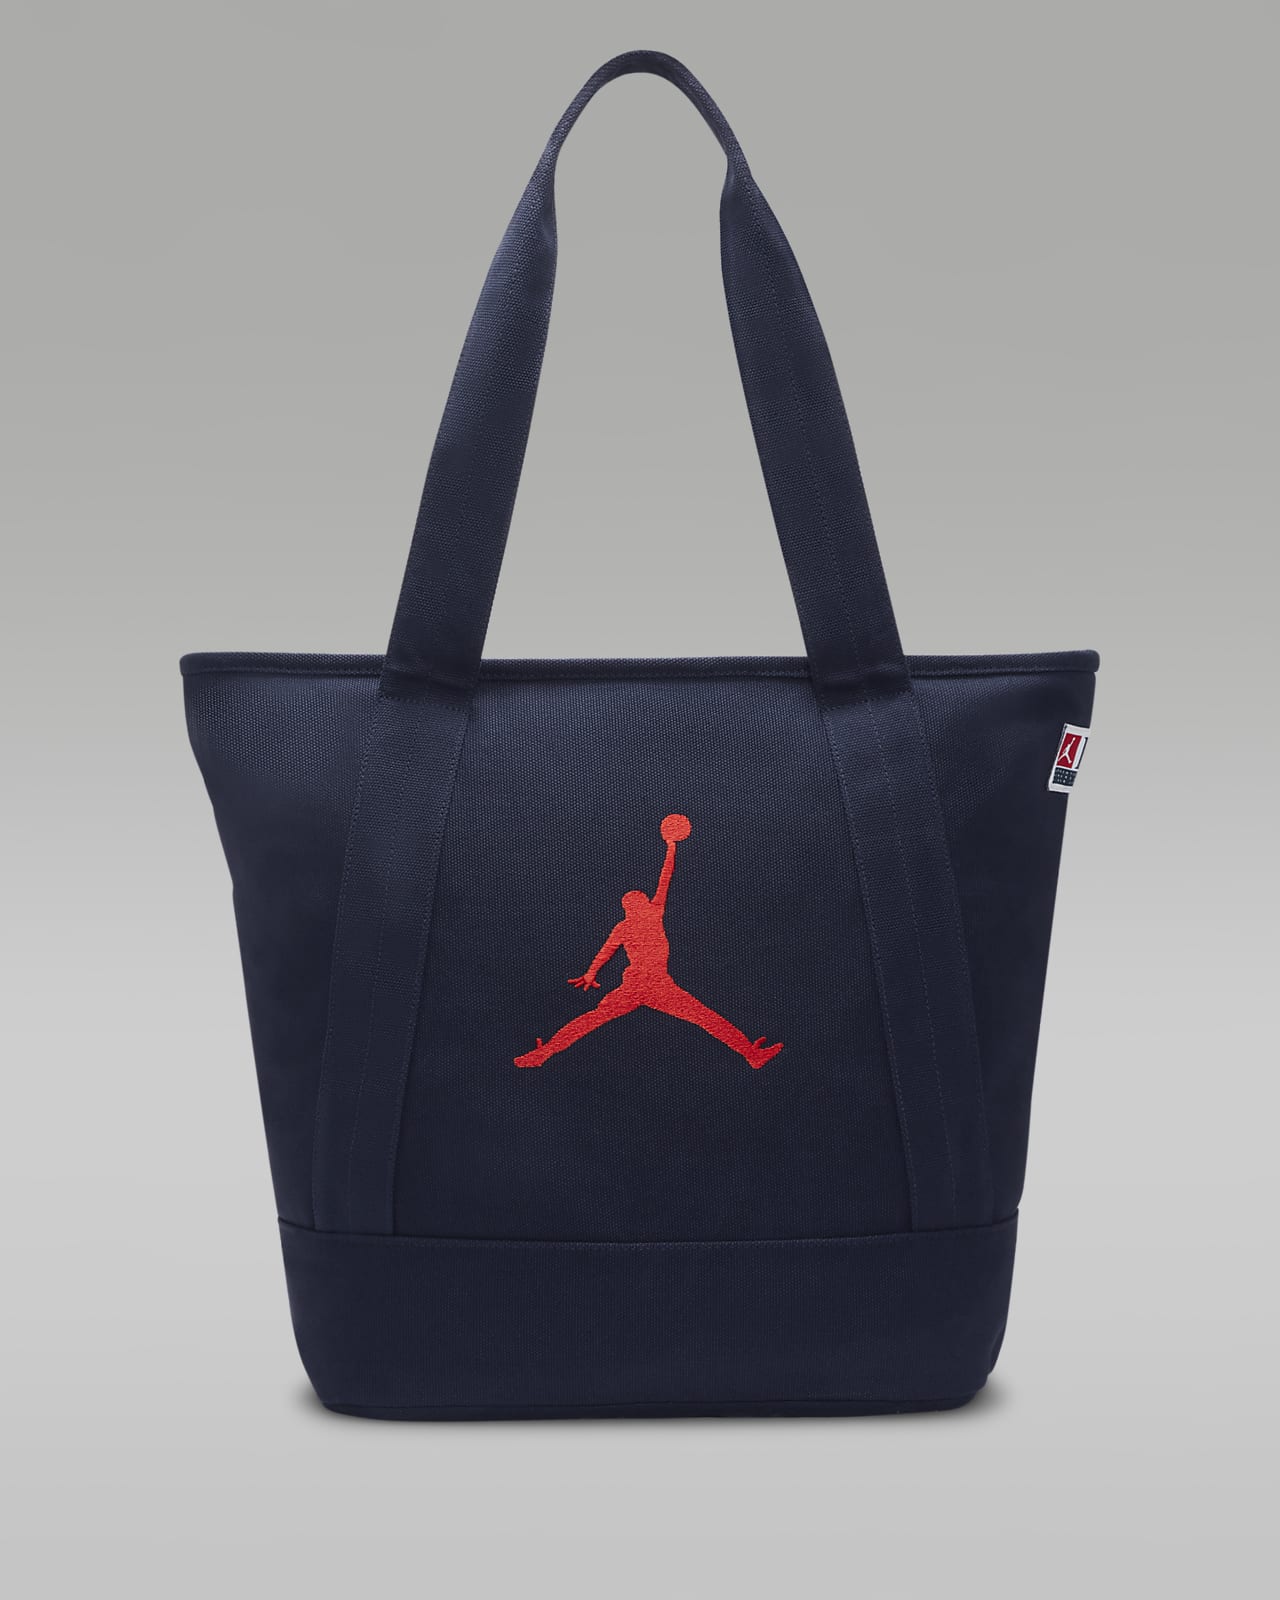 One Tote Bag by Nike Online, THE ICONIC